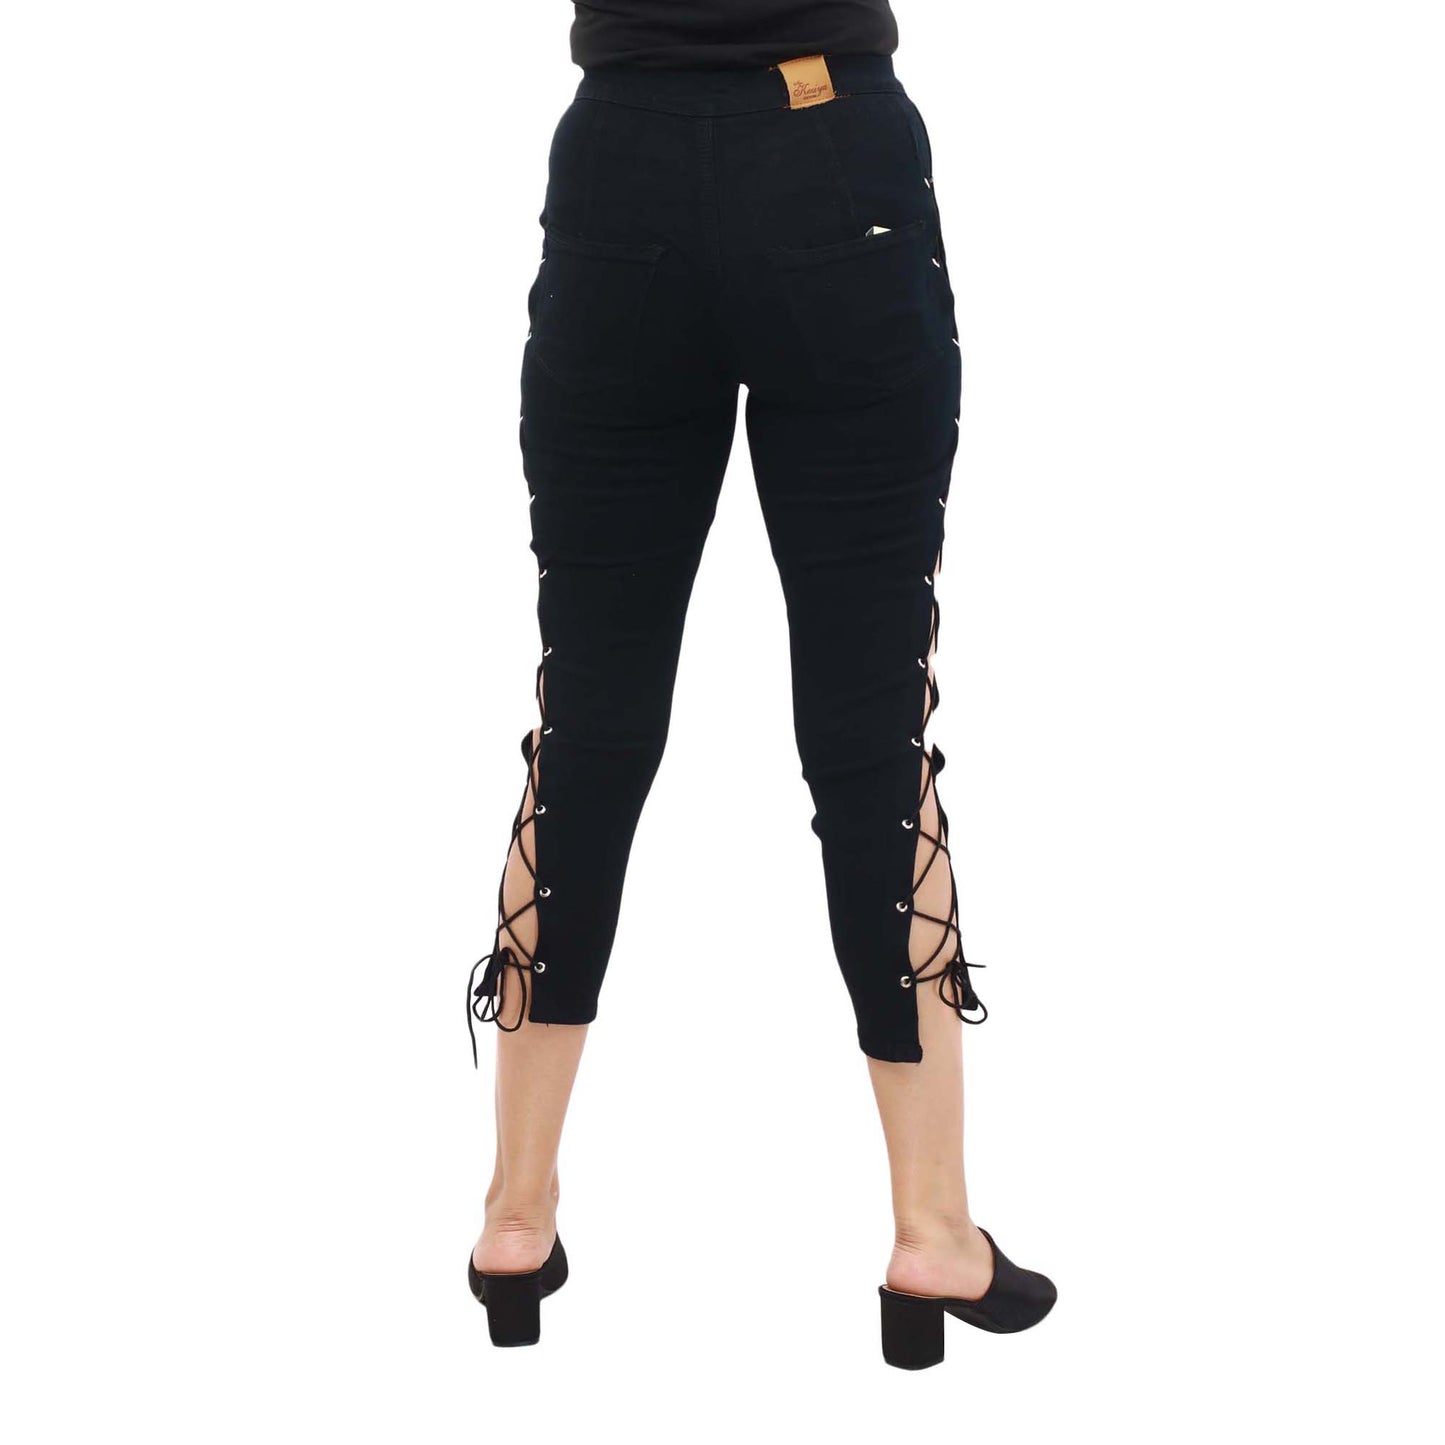 Black jeans skinny pant with lace design